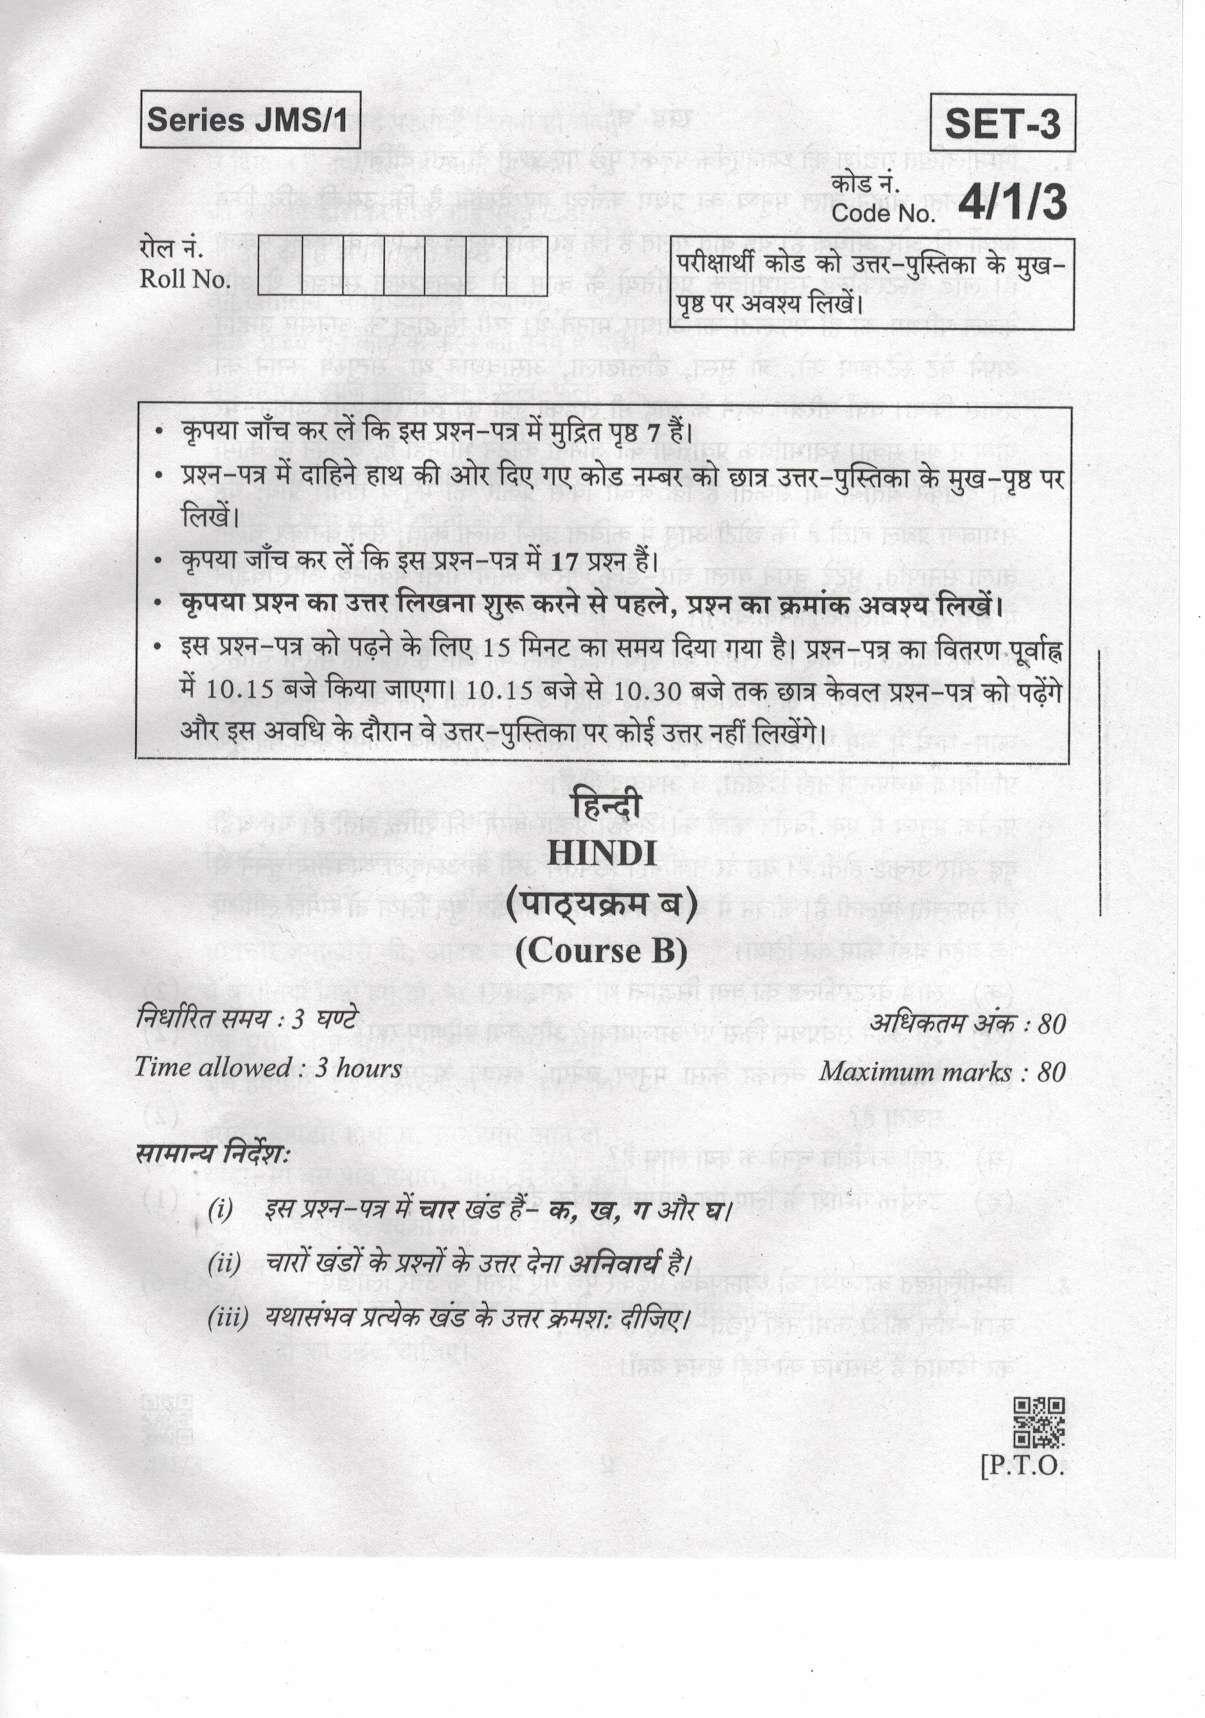 CBSE Class 10 4-1-3 Hindi-B 2019 Question Paper - Page 1